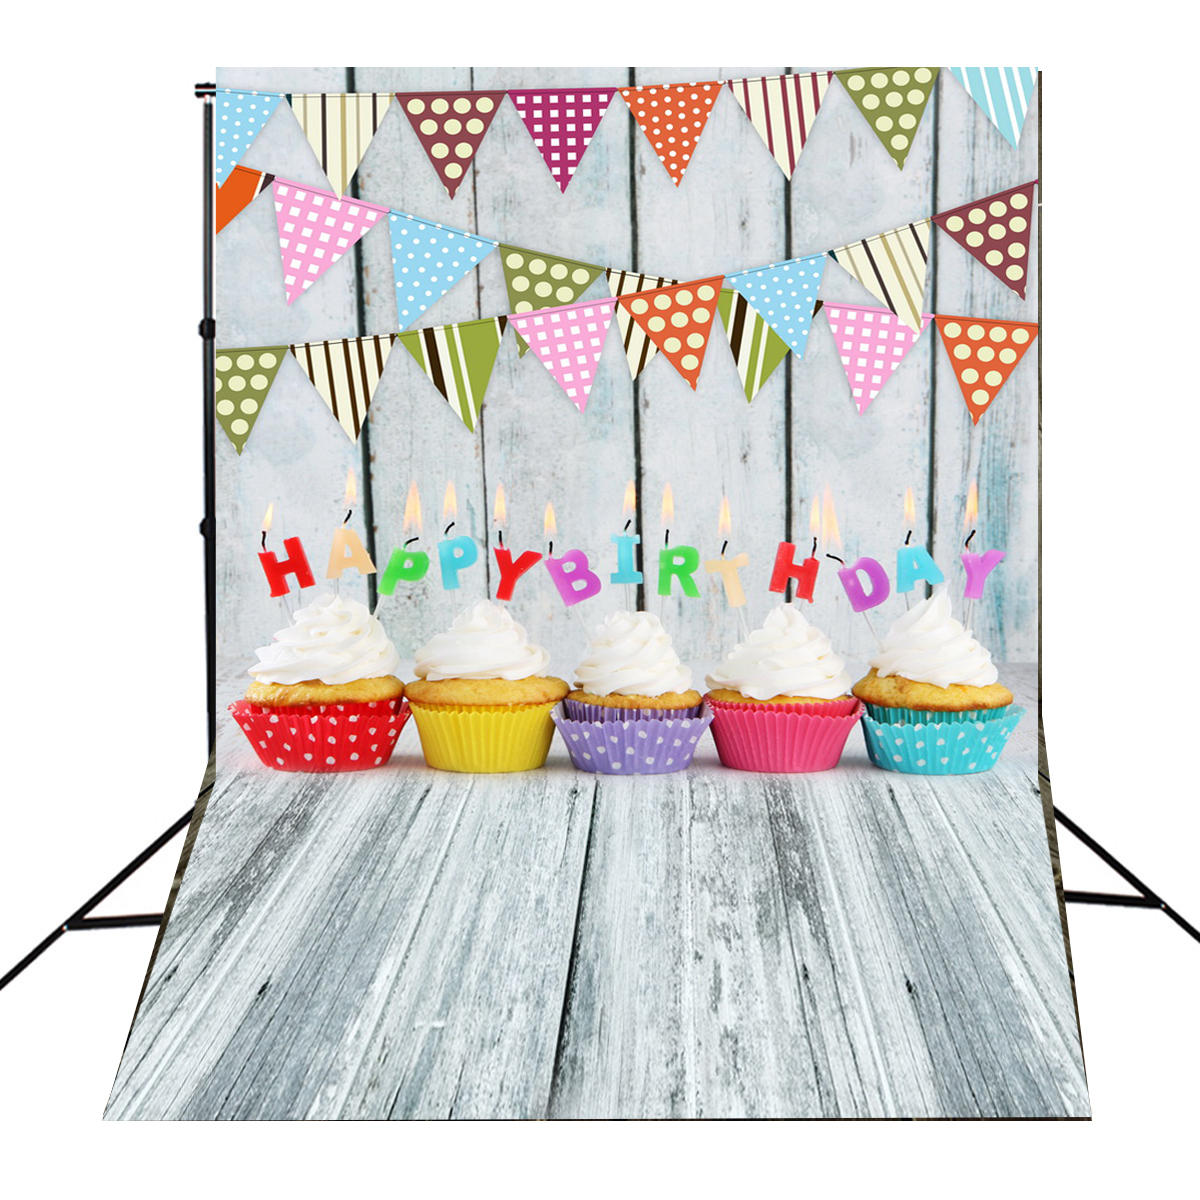 3x5FT Birthday Party Photography Backdrop Photo Studio Background, Banggood  - buy with discount